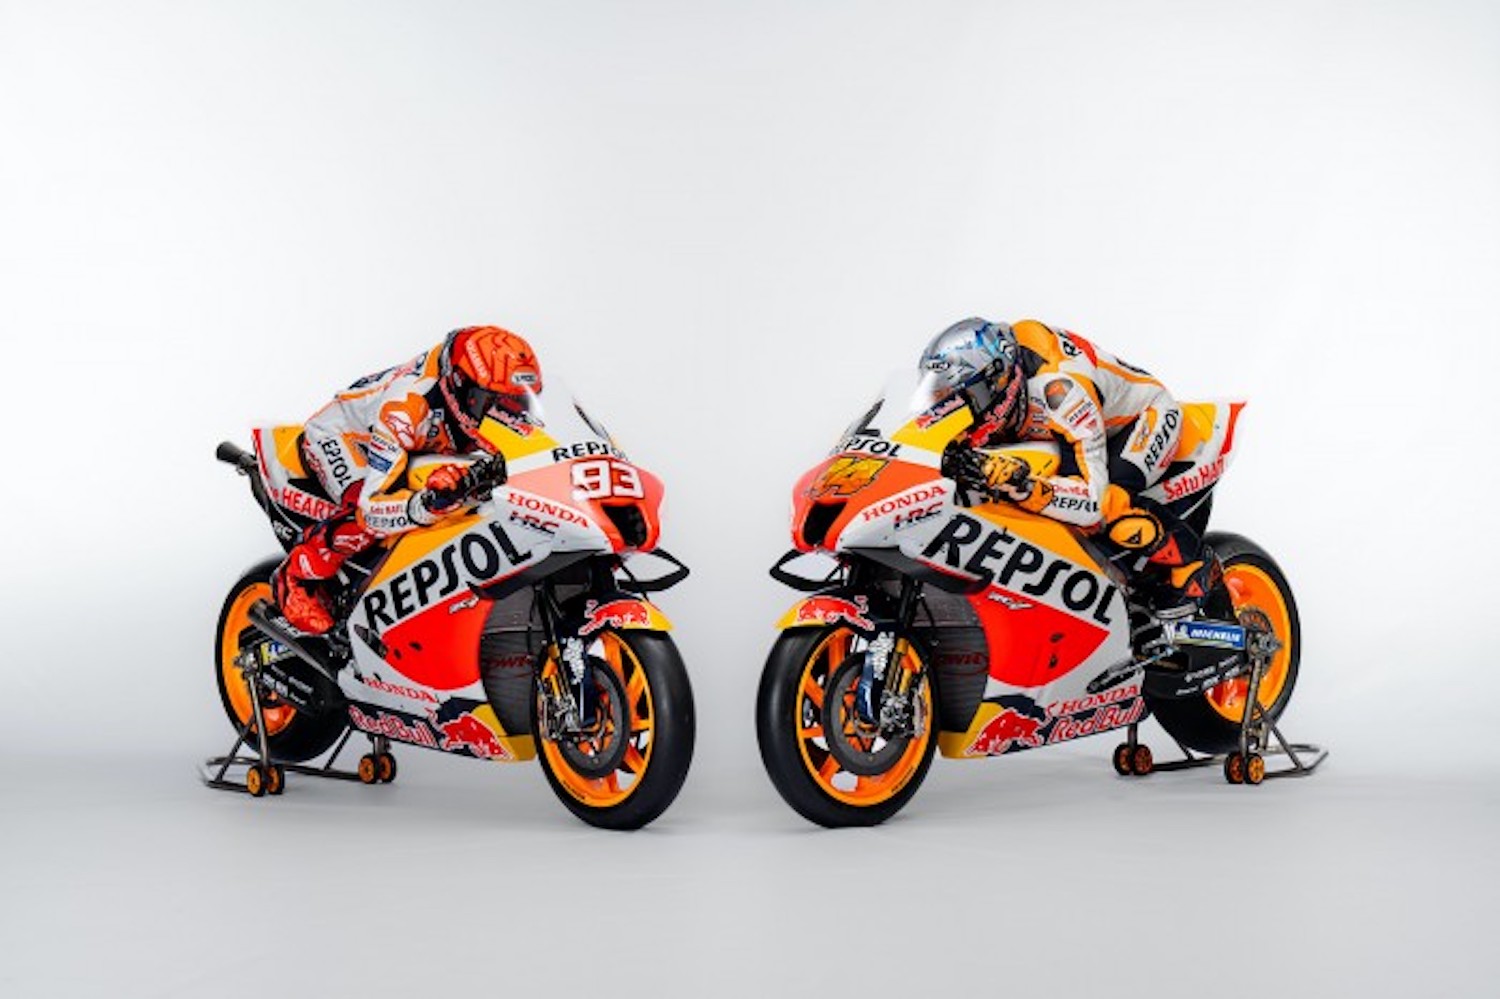 A view of the Honda Repsol Team, with their new livery for the 2022 season of MotoGP